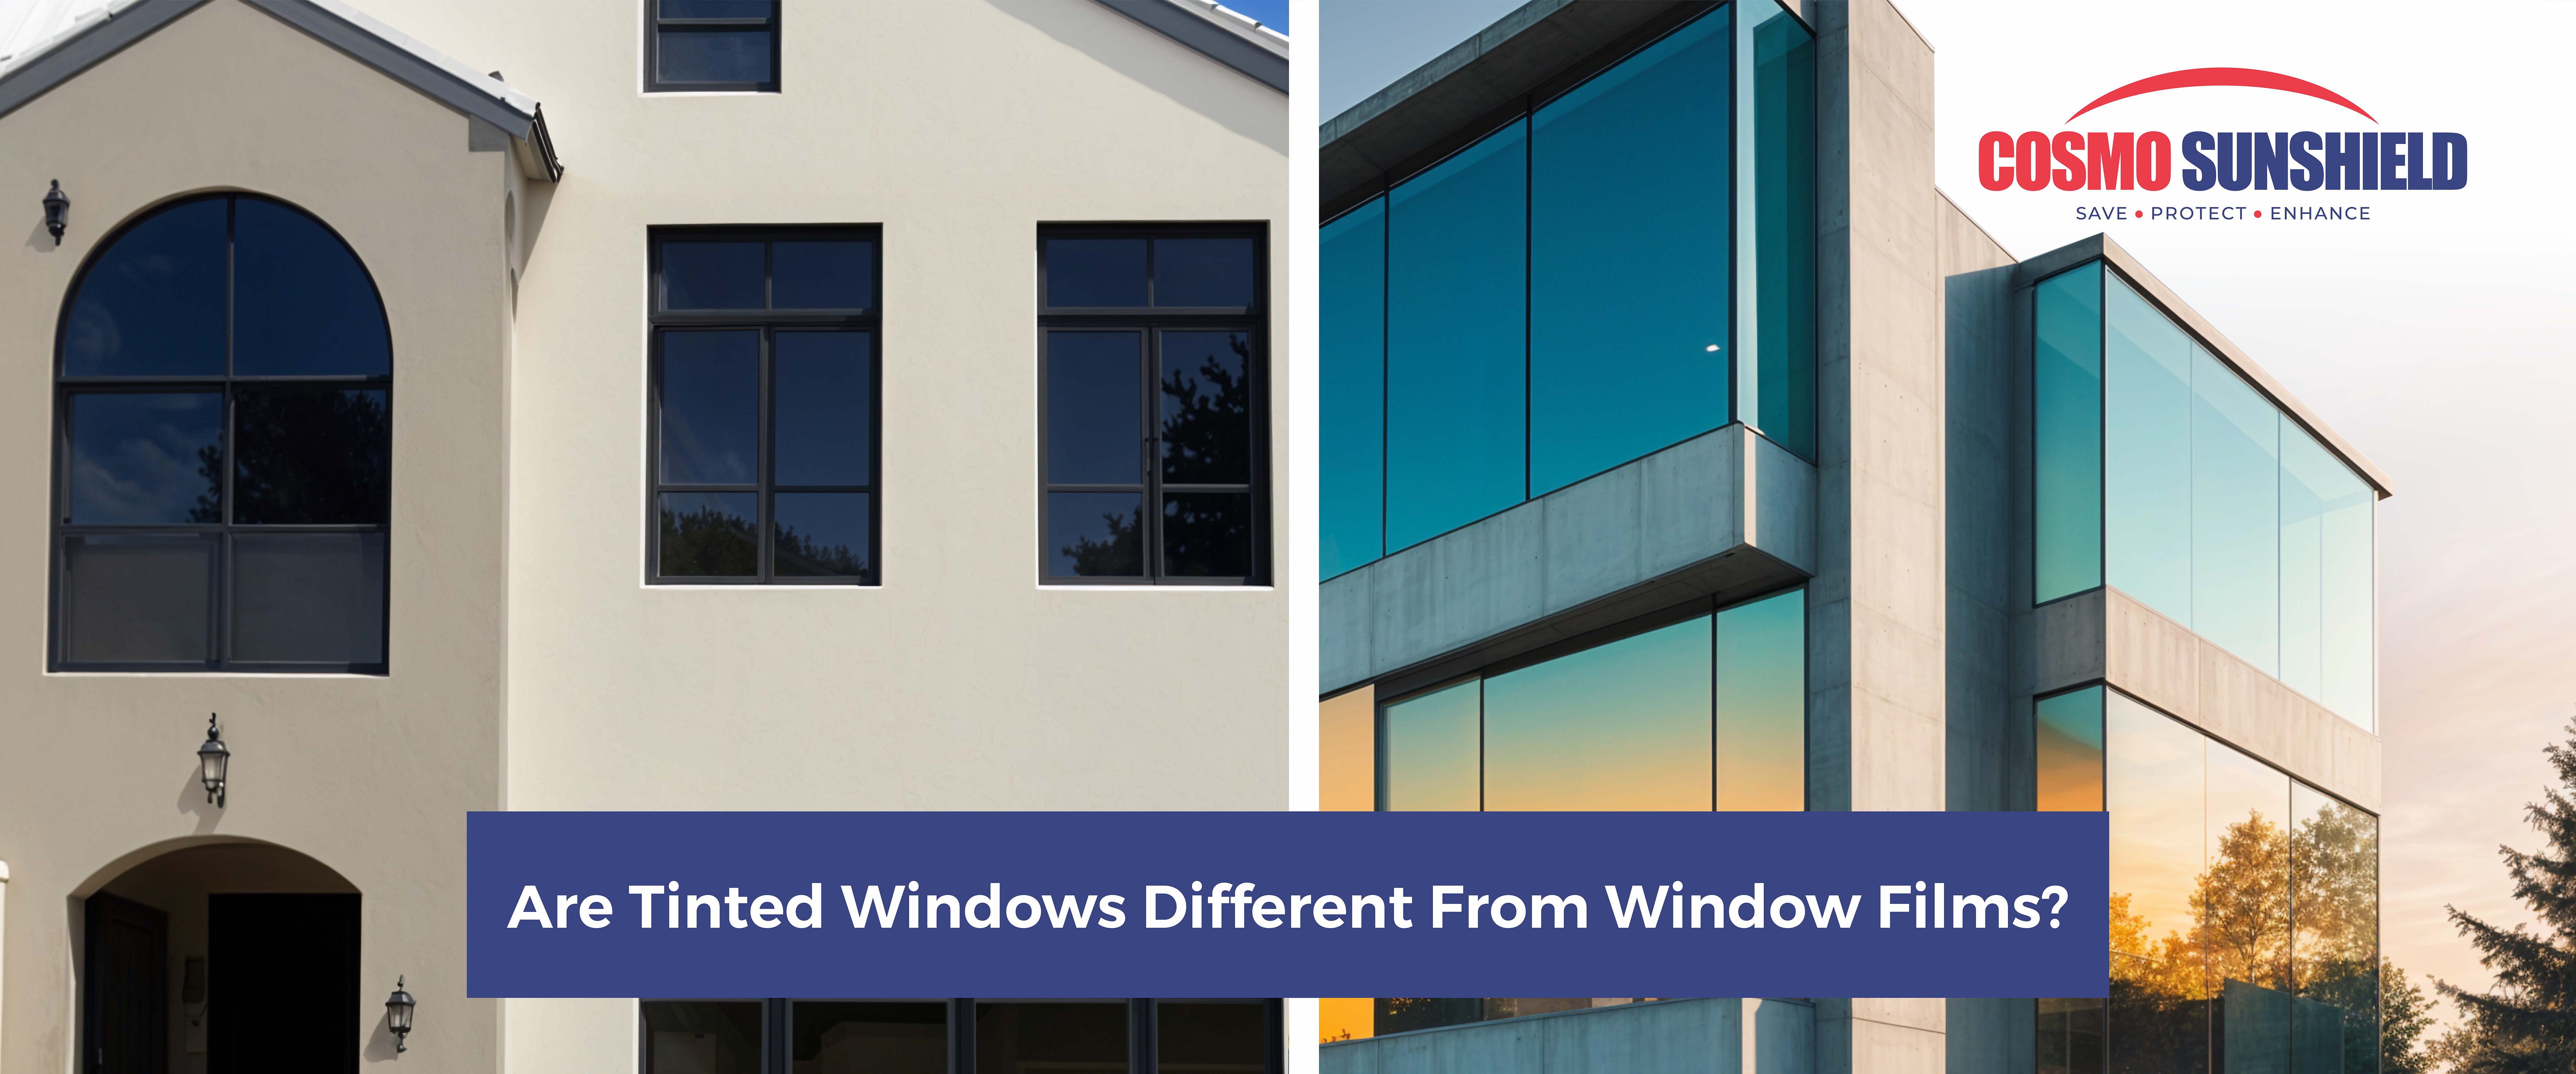 Are Tinted Windows Different from Window Films